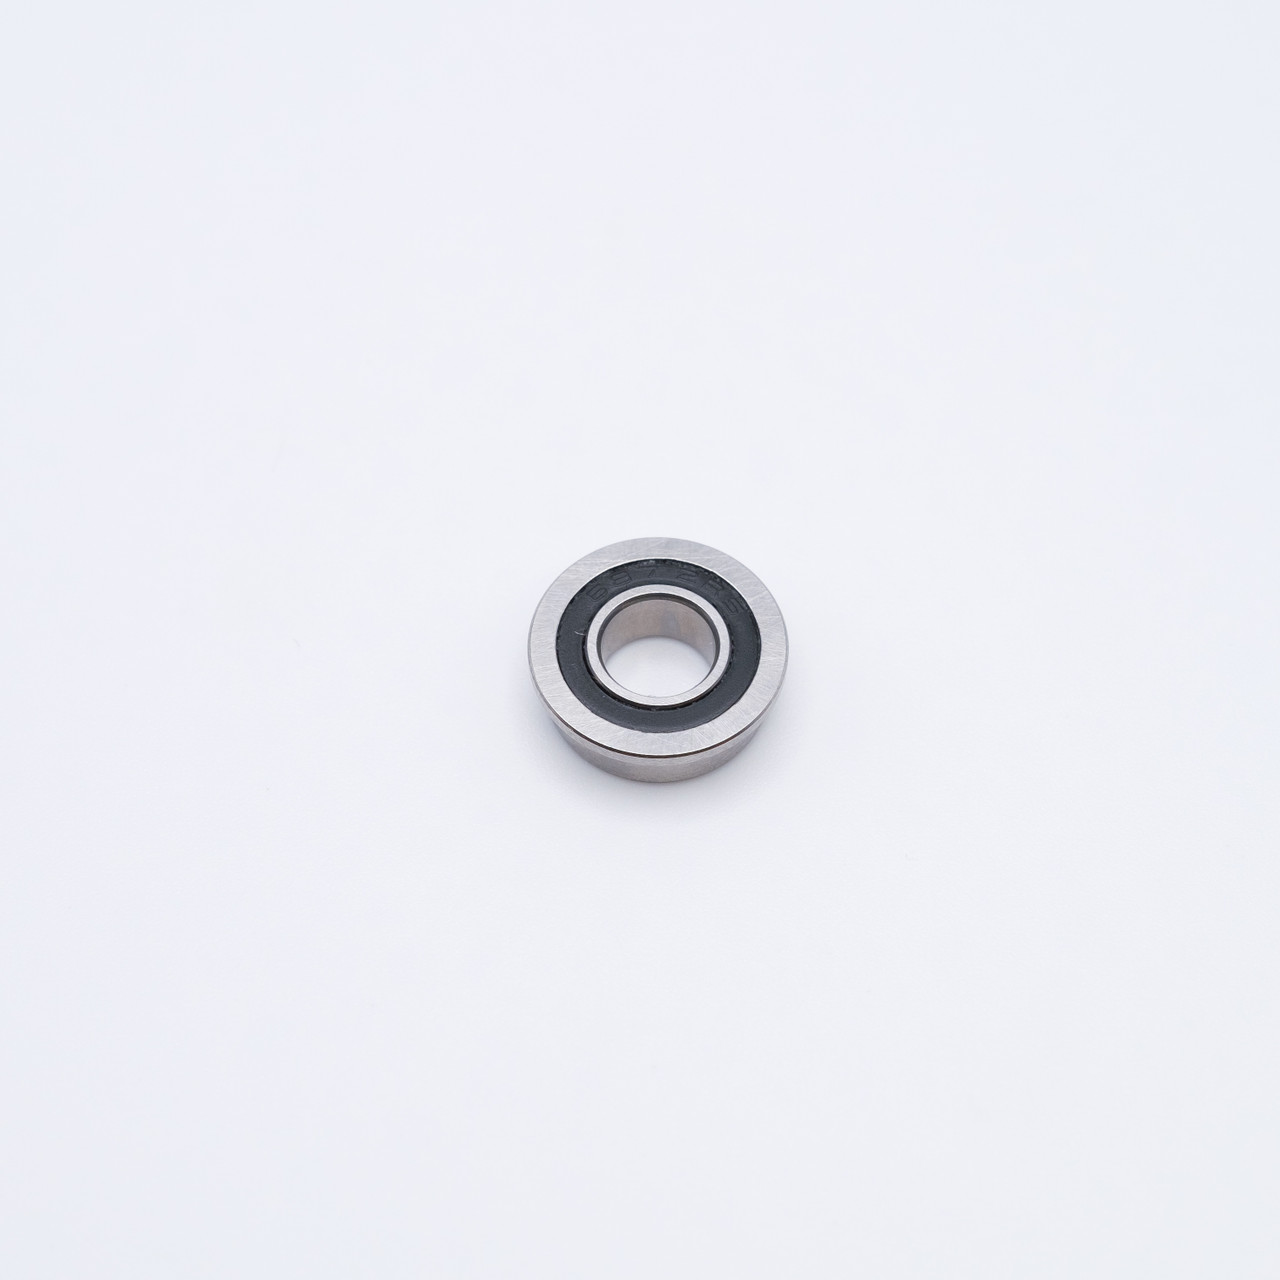 F635-2RS Miniature Flanged Ball Bearing 5x19x6 Sealed Top View